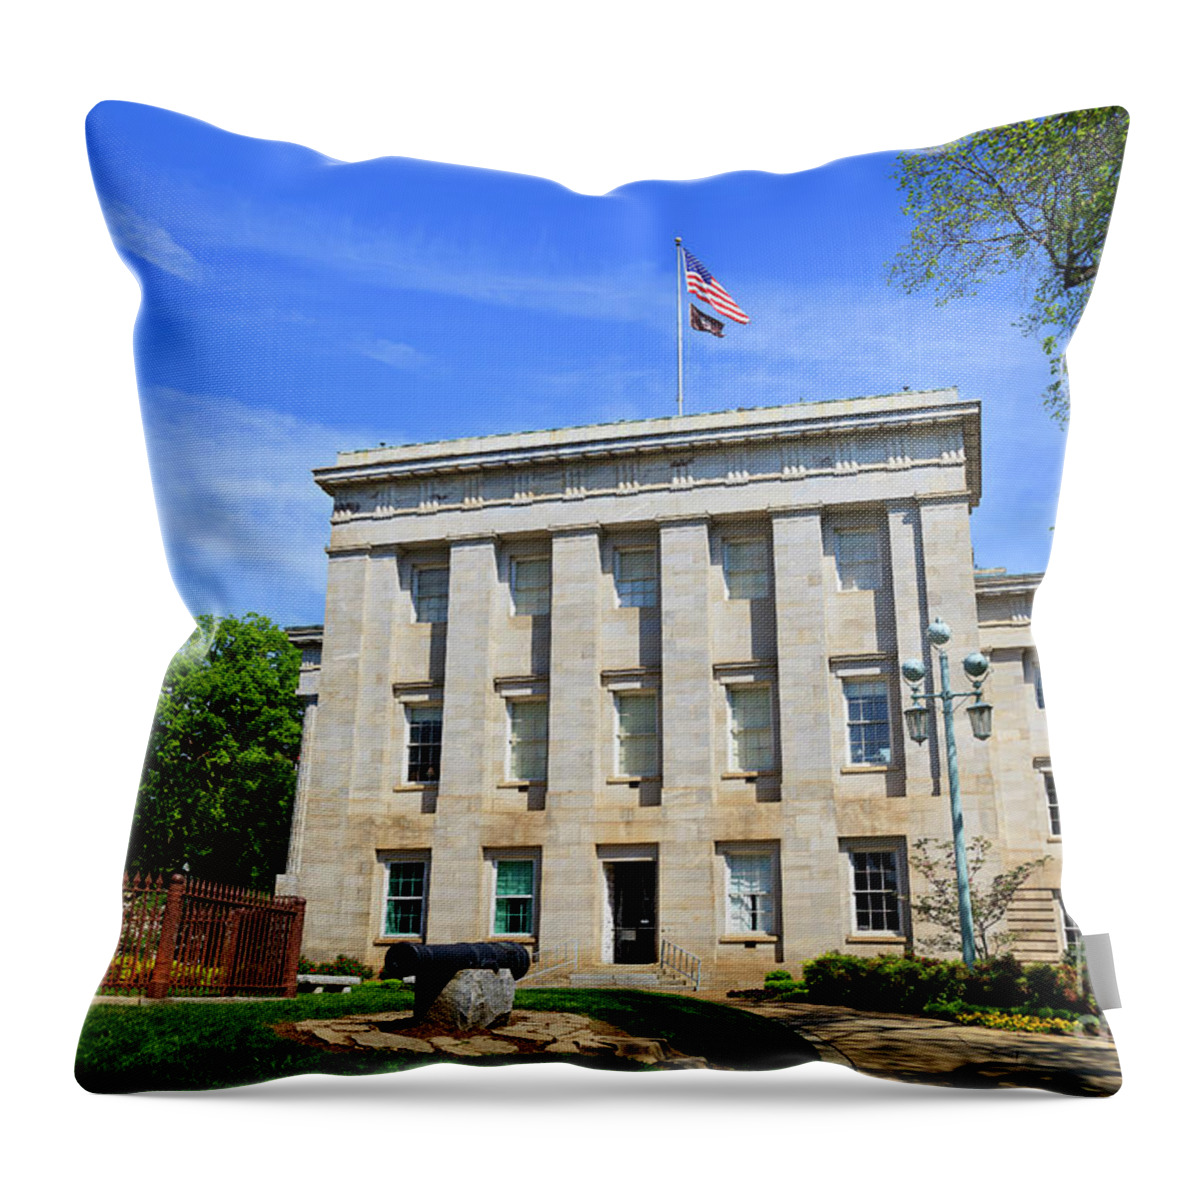 Bicentennial Plaza Throw Pillow featuring the photograph North Carolina State Capitol Building by Jill Lang